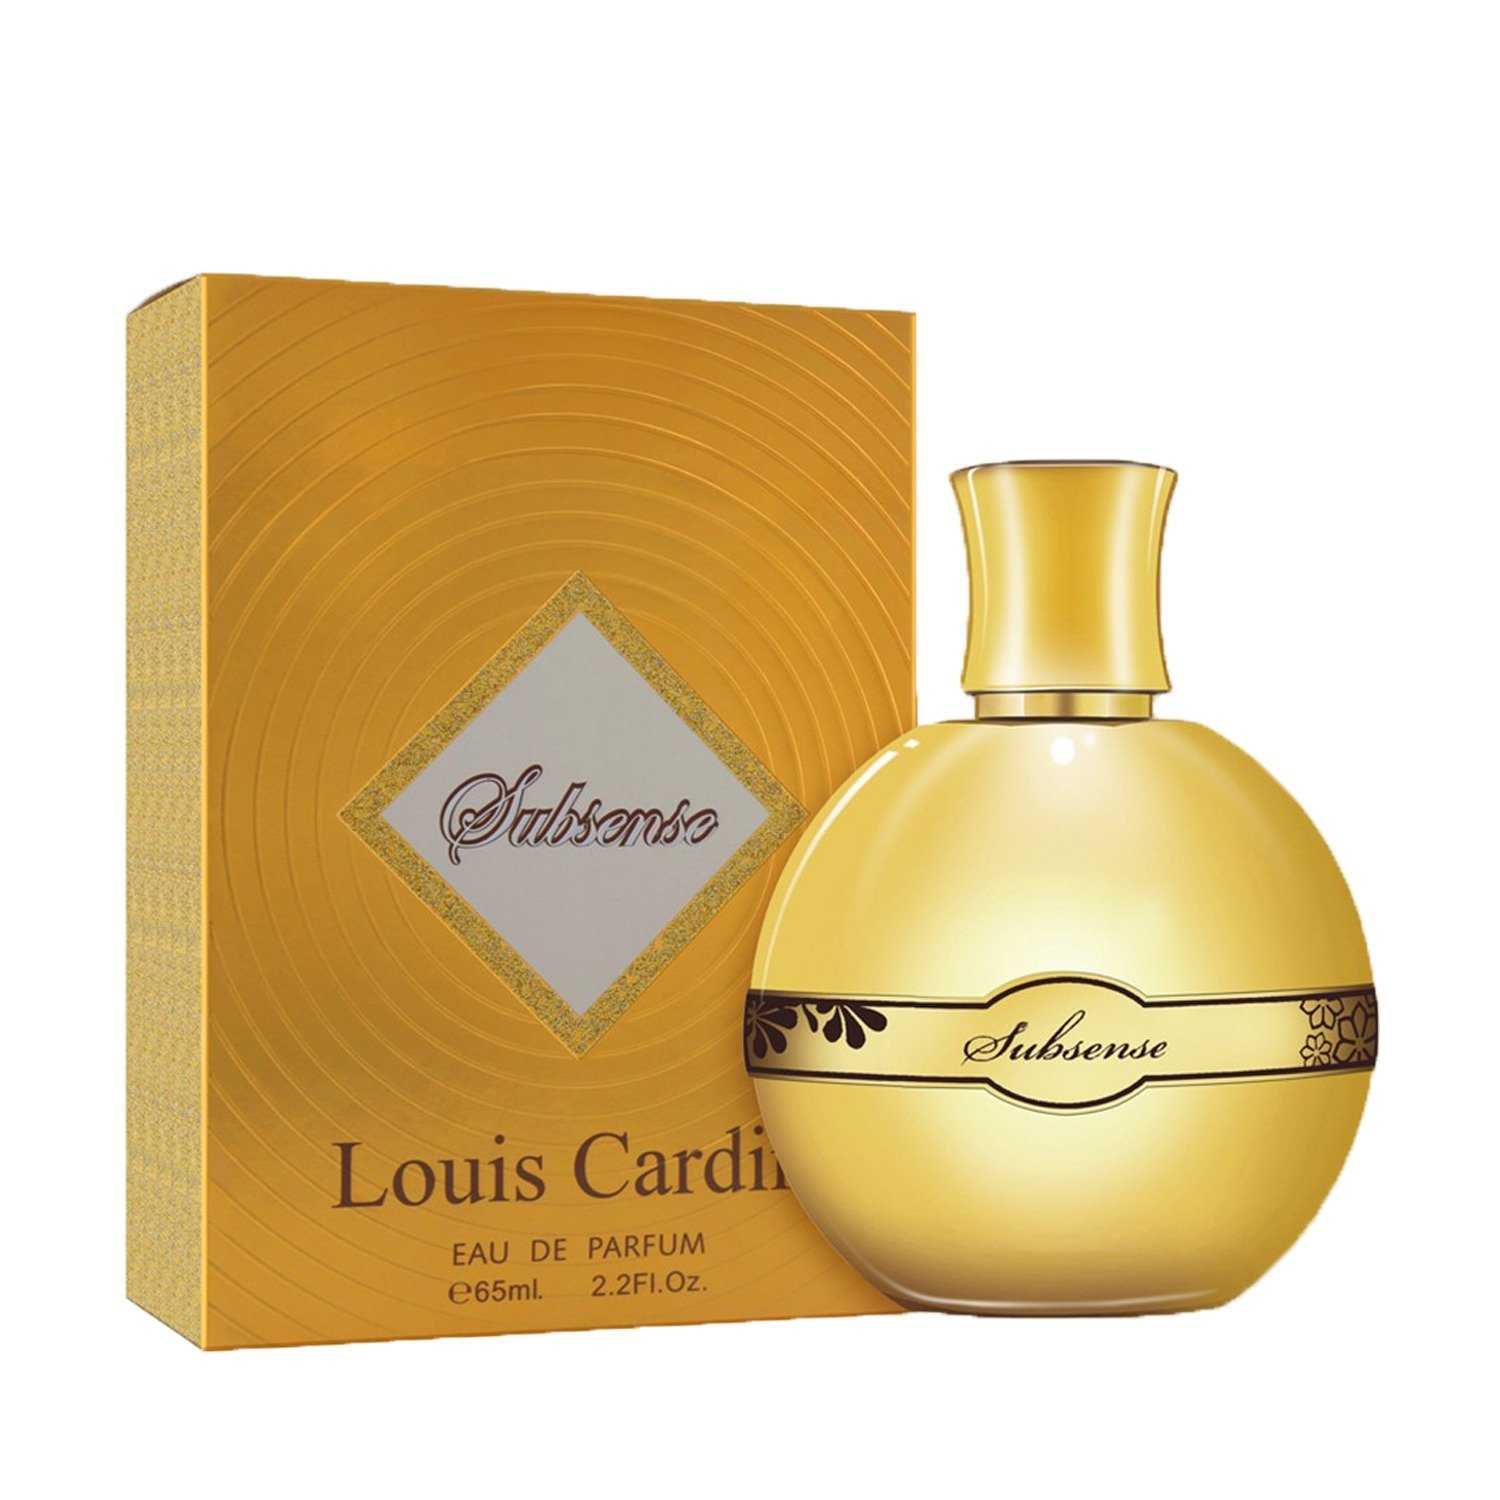 Louis Cardin Perfumes - Are you ready to plunge into the scent of